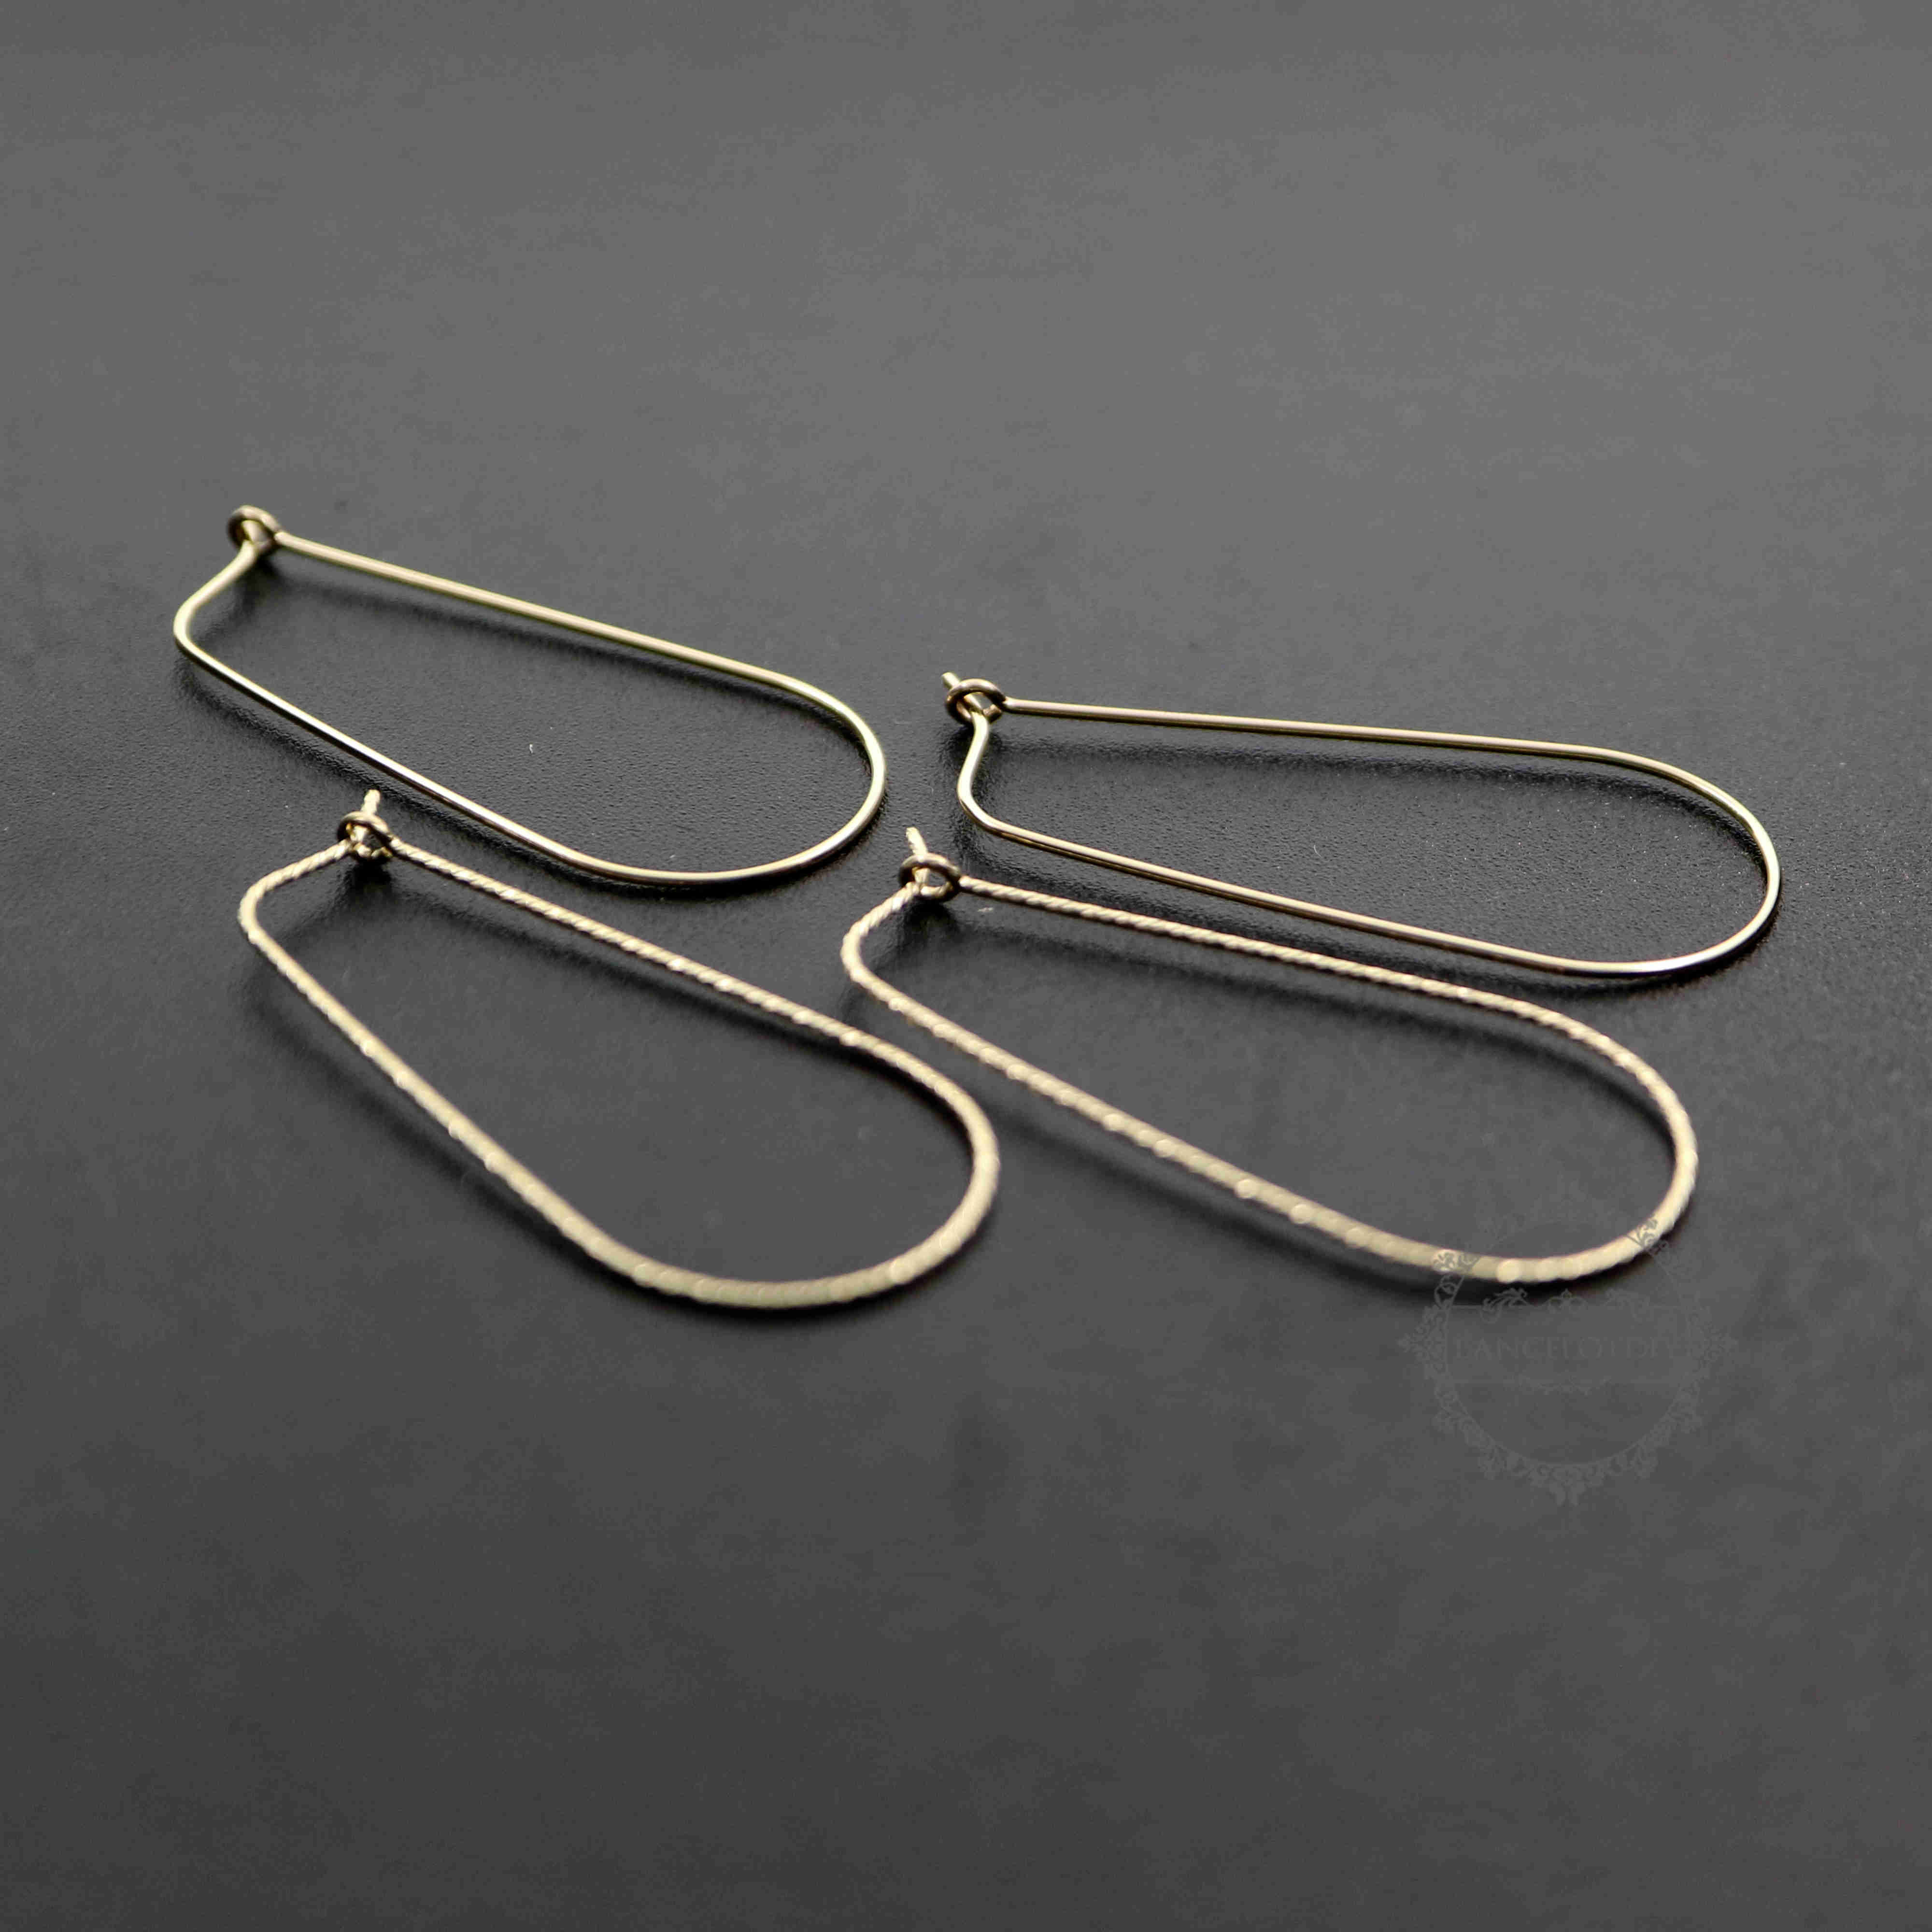 1Pair 14K Gold Filled Color Not Tarnished 0.71MM 21Gauge Wire Beading Earrings Hoop DIY Earrings Supplies Findings 1705063 - Click Image to Close